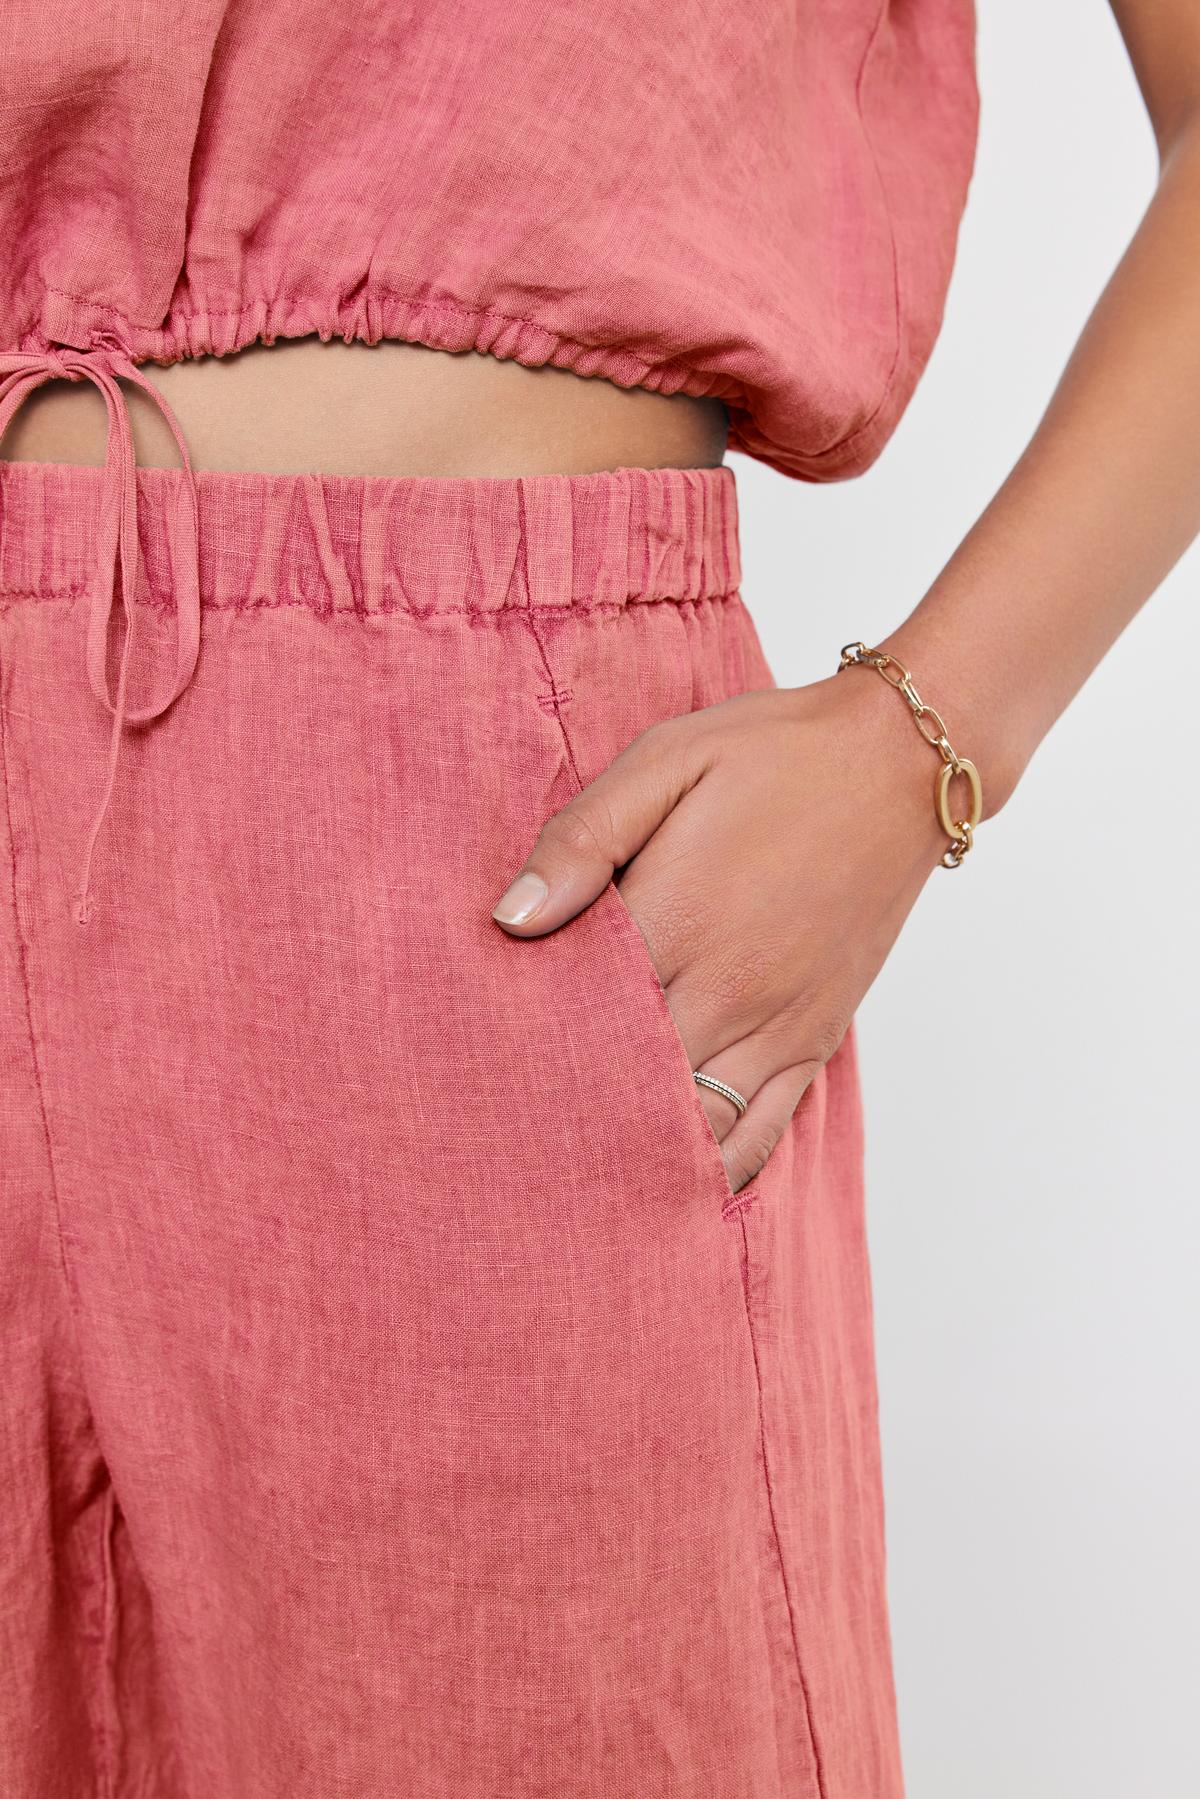   A person wearing a pink outfit with Velvet by Graham & Spencer's LOLA LINEN PANTs that feature a drawstring waist holds their right hand in their pocket, showing a gold bracelet and a ring on the same hand. 